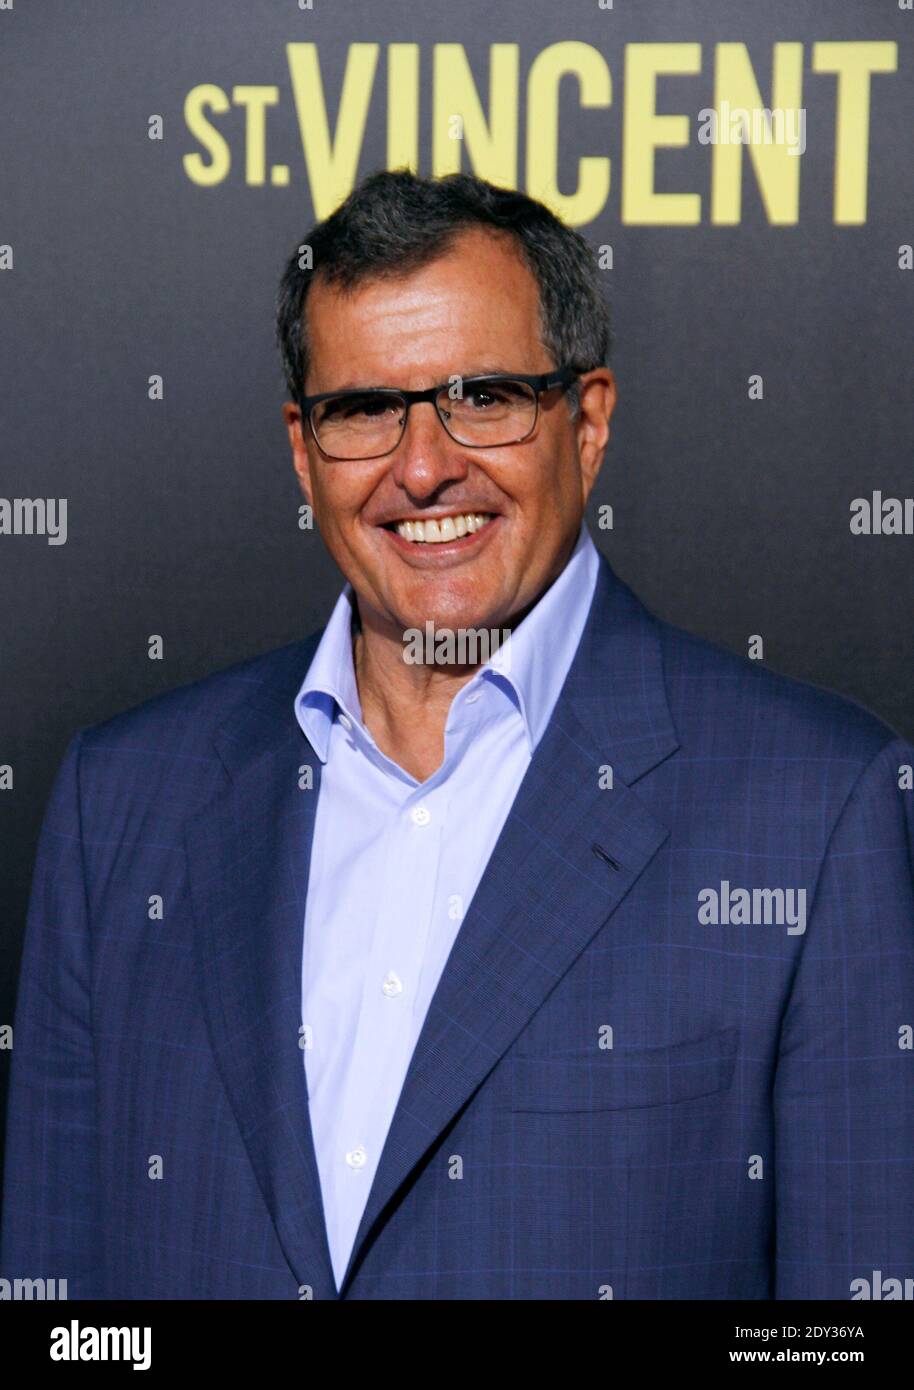 Peter Chernin attends the 'St Vincent' premiere at the Ziegfeld Theater in New York City, NY, USA on October 06, 2014. Photo by Donna Ward/ABACAPRESS.COM Stock Photo